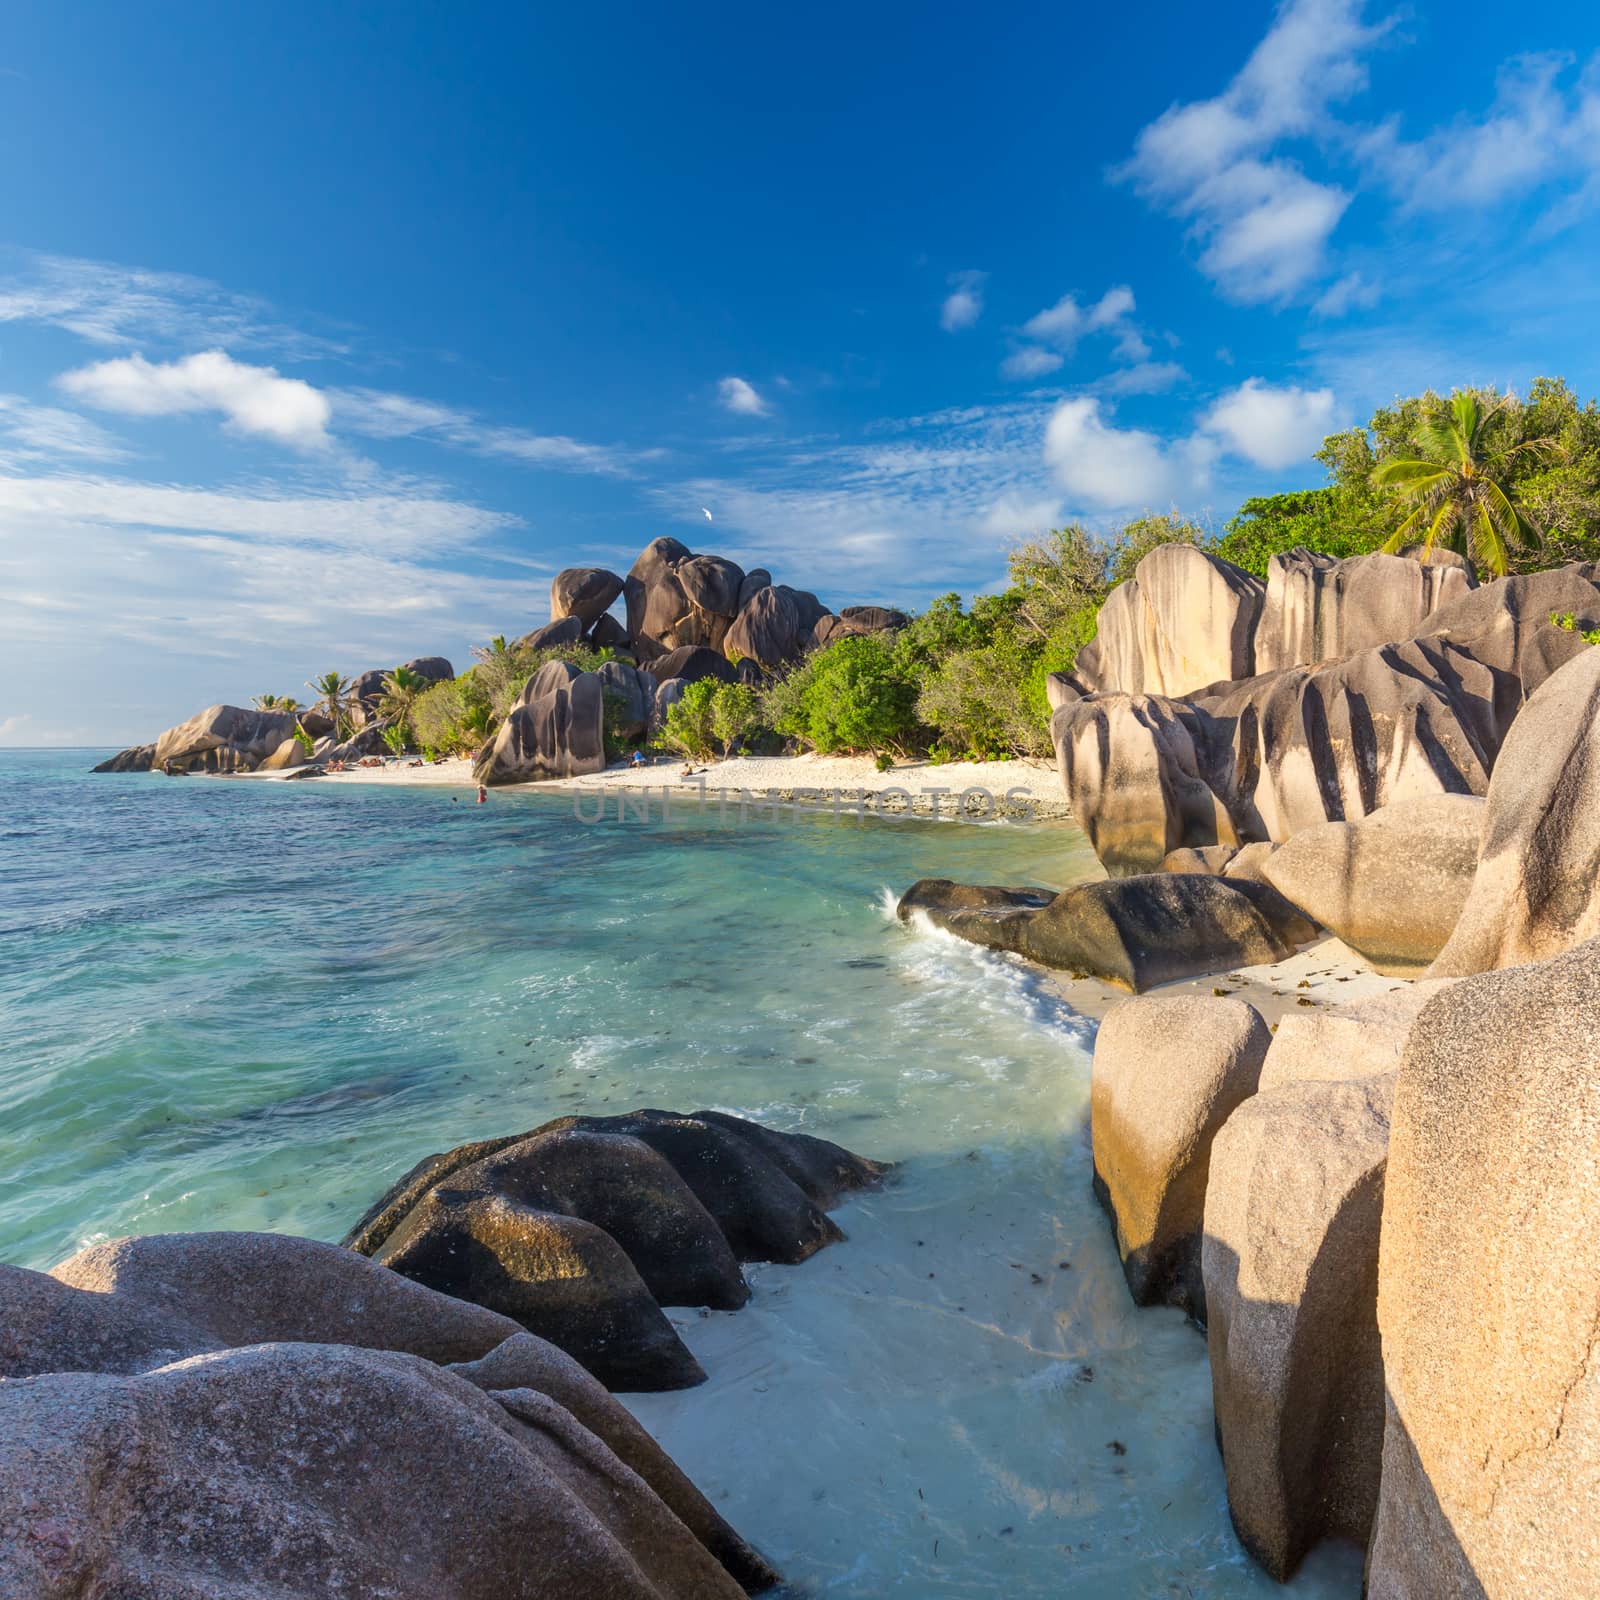 Beautifully shaped granite boulders in illuminated by summer sun on picture perfect tropical Anse Source d'Argent beach, La Digue island, Seychelles.